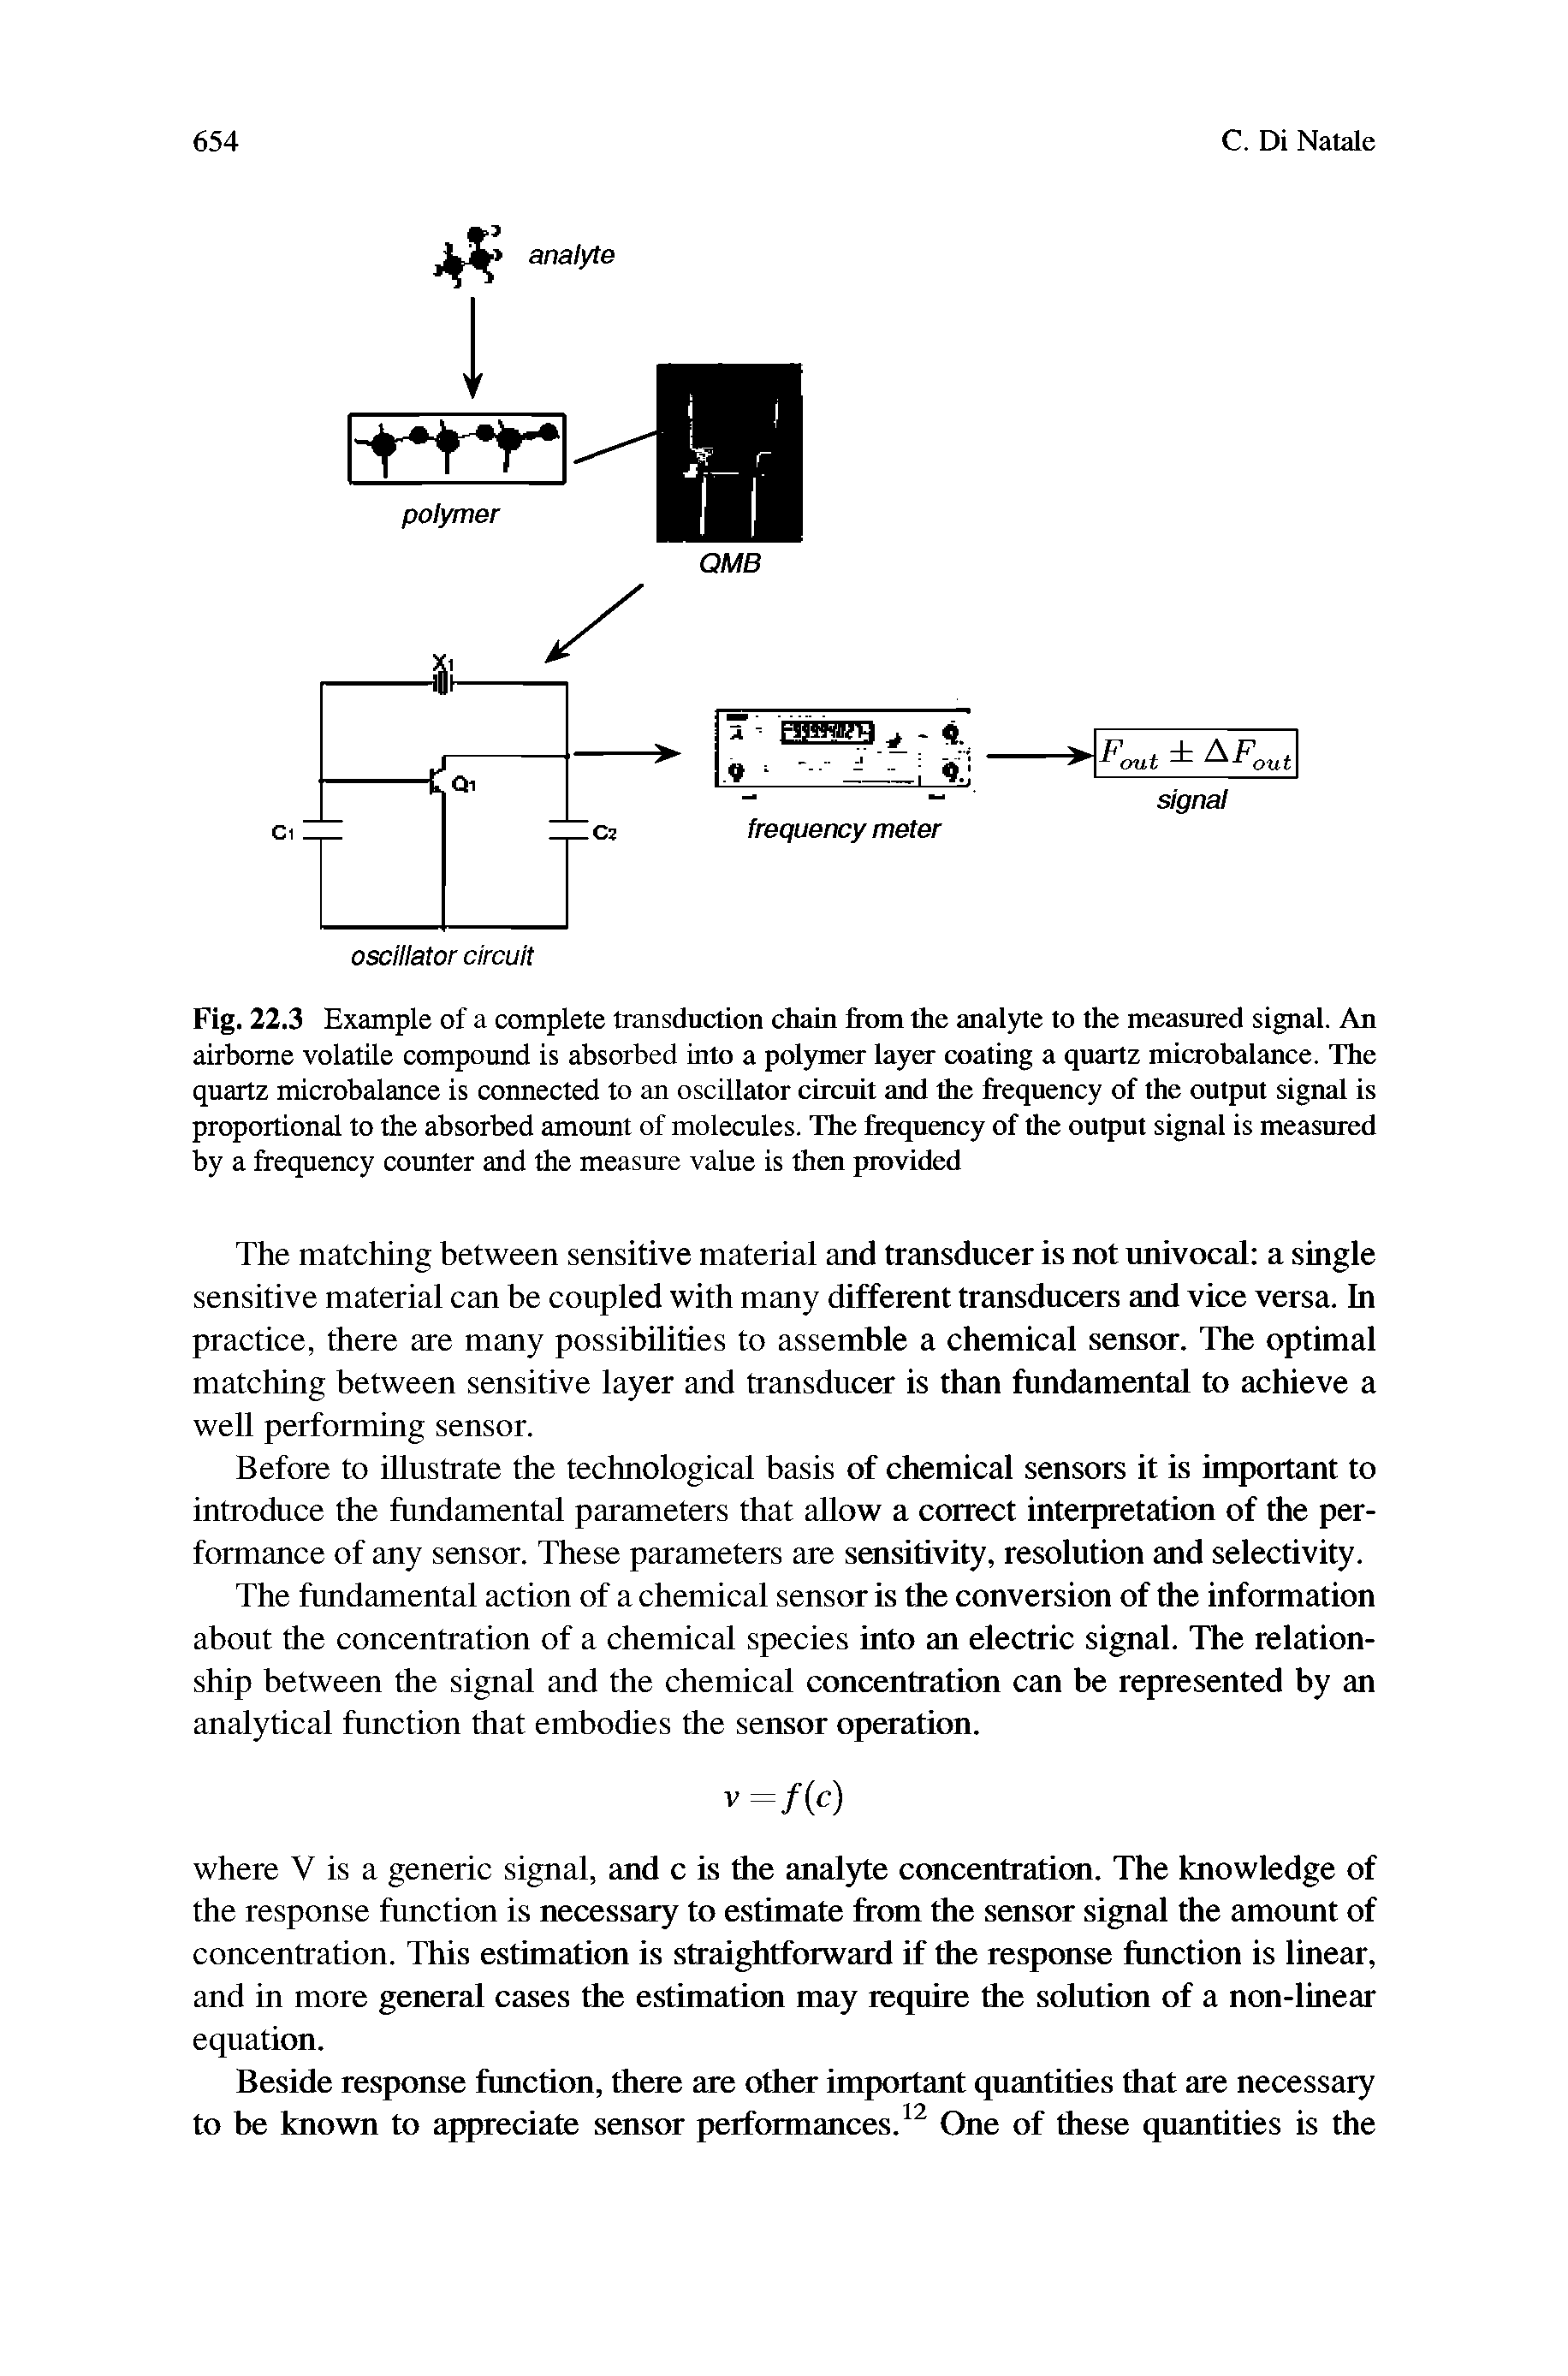 Fig. 22.3 Example of a complete transduction chain iiom the analyte to the measured signal. An airborne volatile compound is absorbed into a polymer layta- eoating a quartz microbalance. The quartz microbalance is connected to an oscillator circuit and the frequency of the output signal is proportional to the absorbed amount of molecules. The frequtaicy of the output signal is measured by a frequency counter and the measure value is thtm provided...